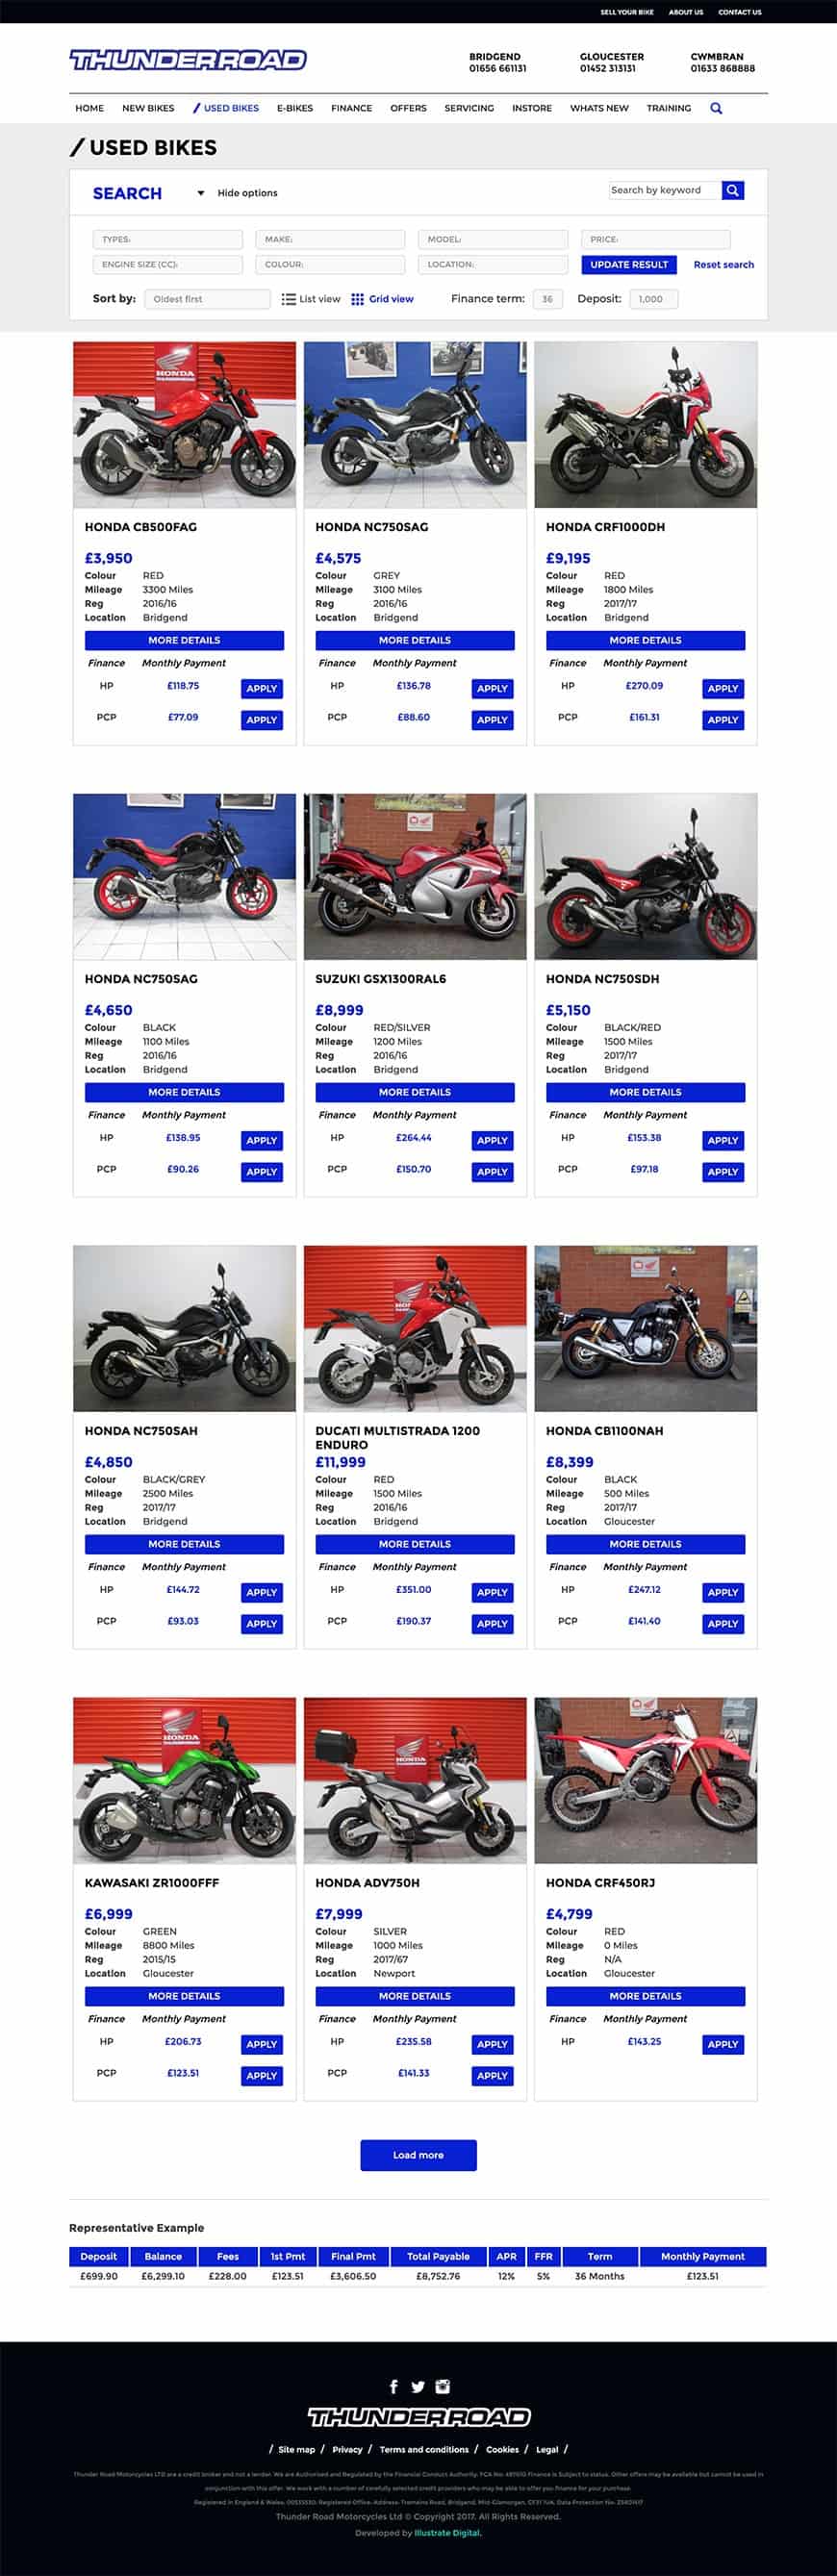 Thunder Road Website Used Bikes Page